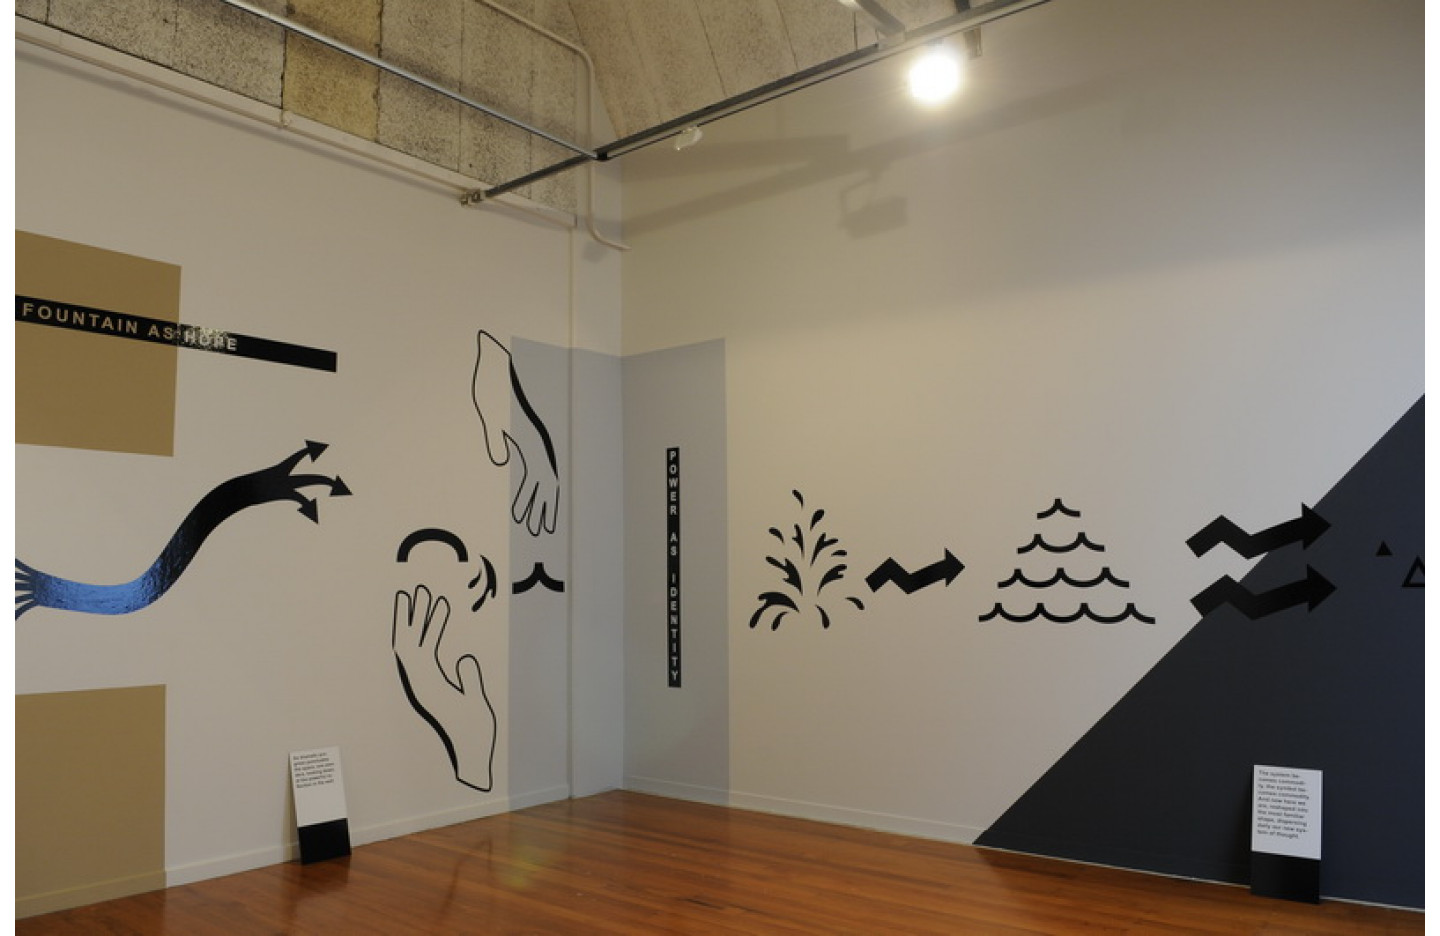 Speaking Places: How to work, Ramp Gallery (2015)